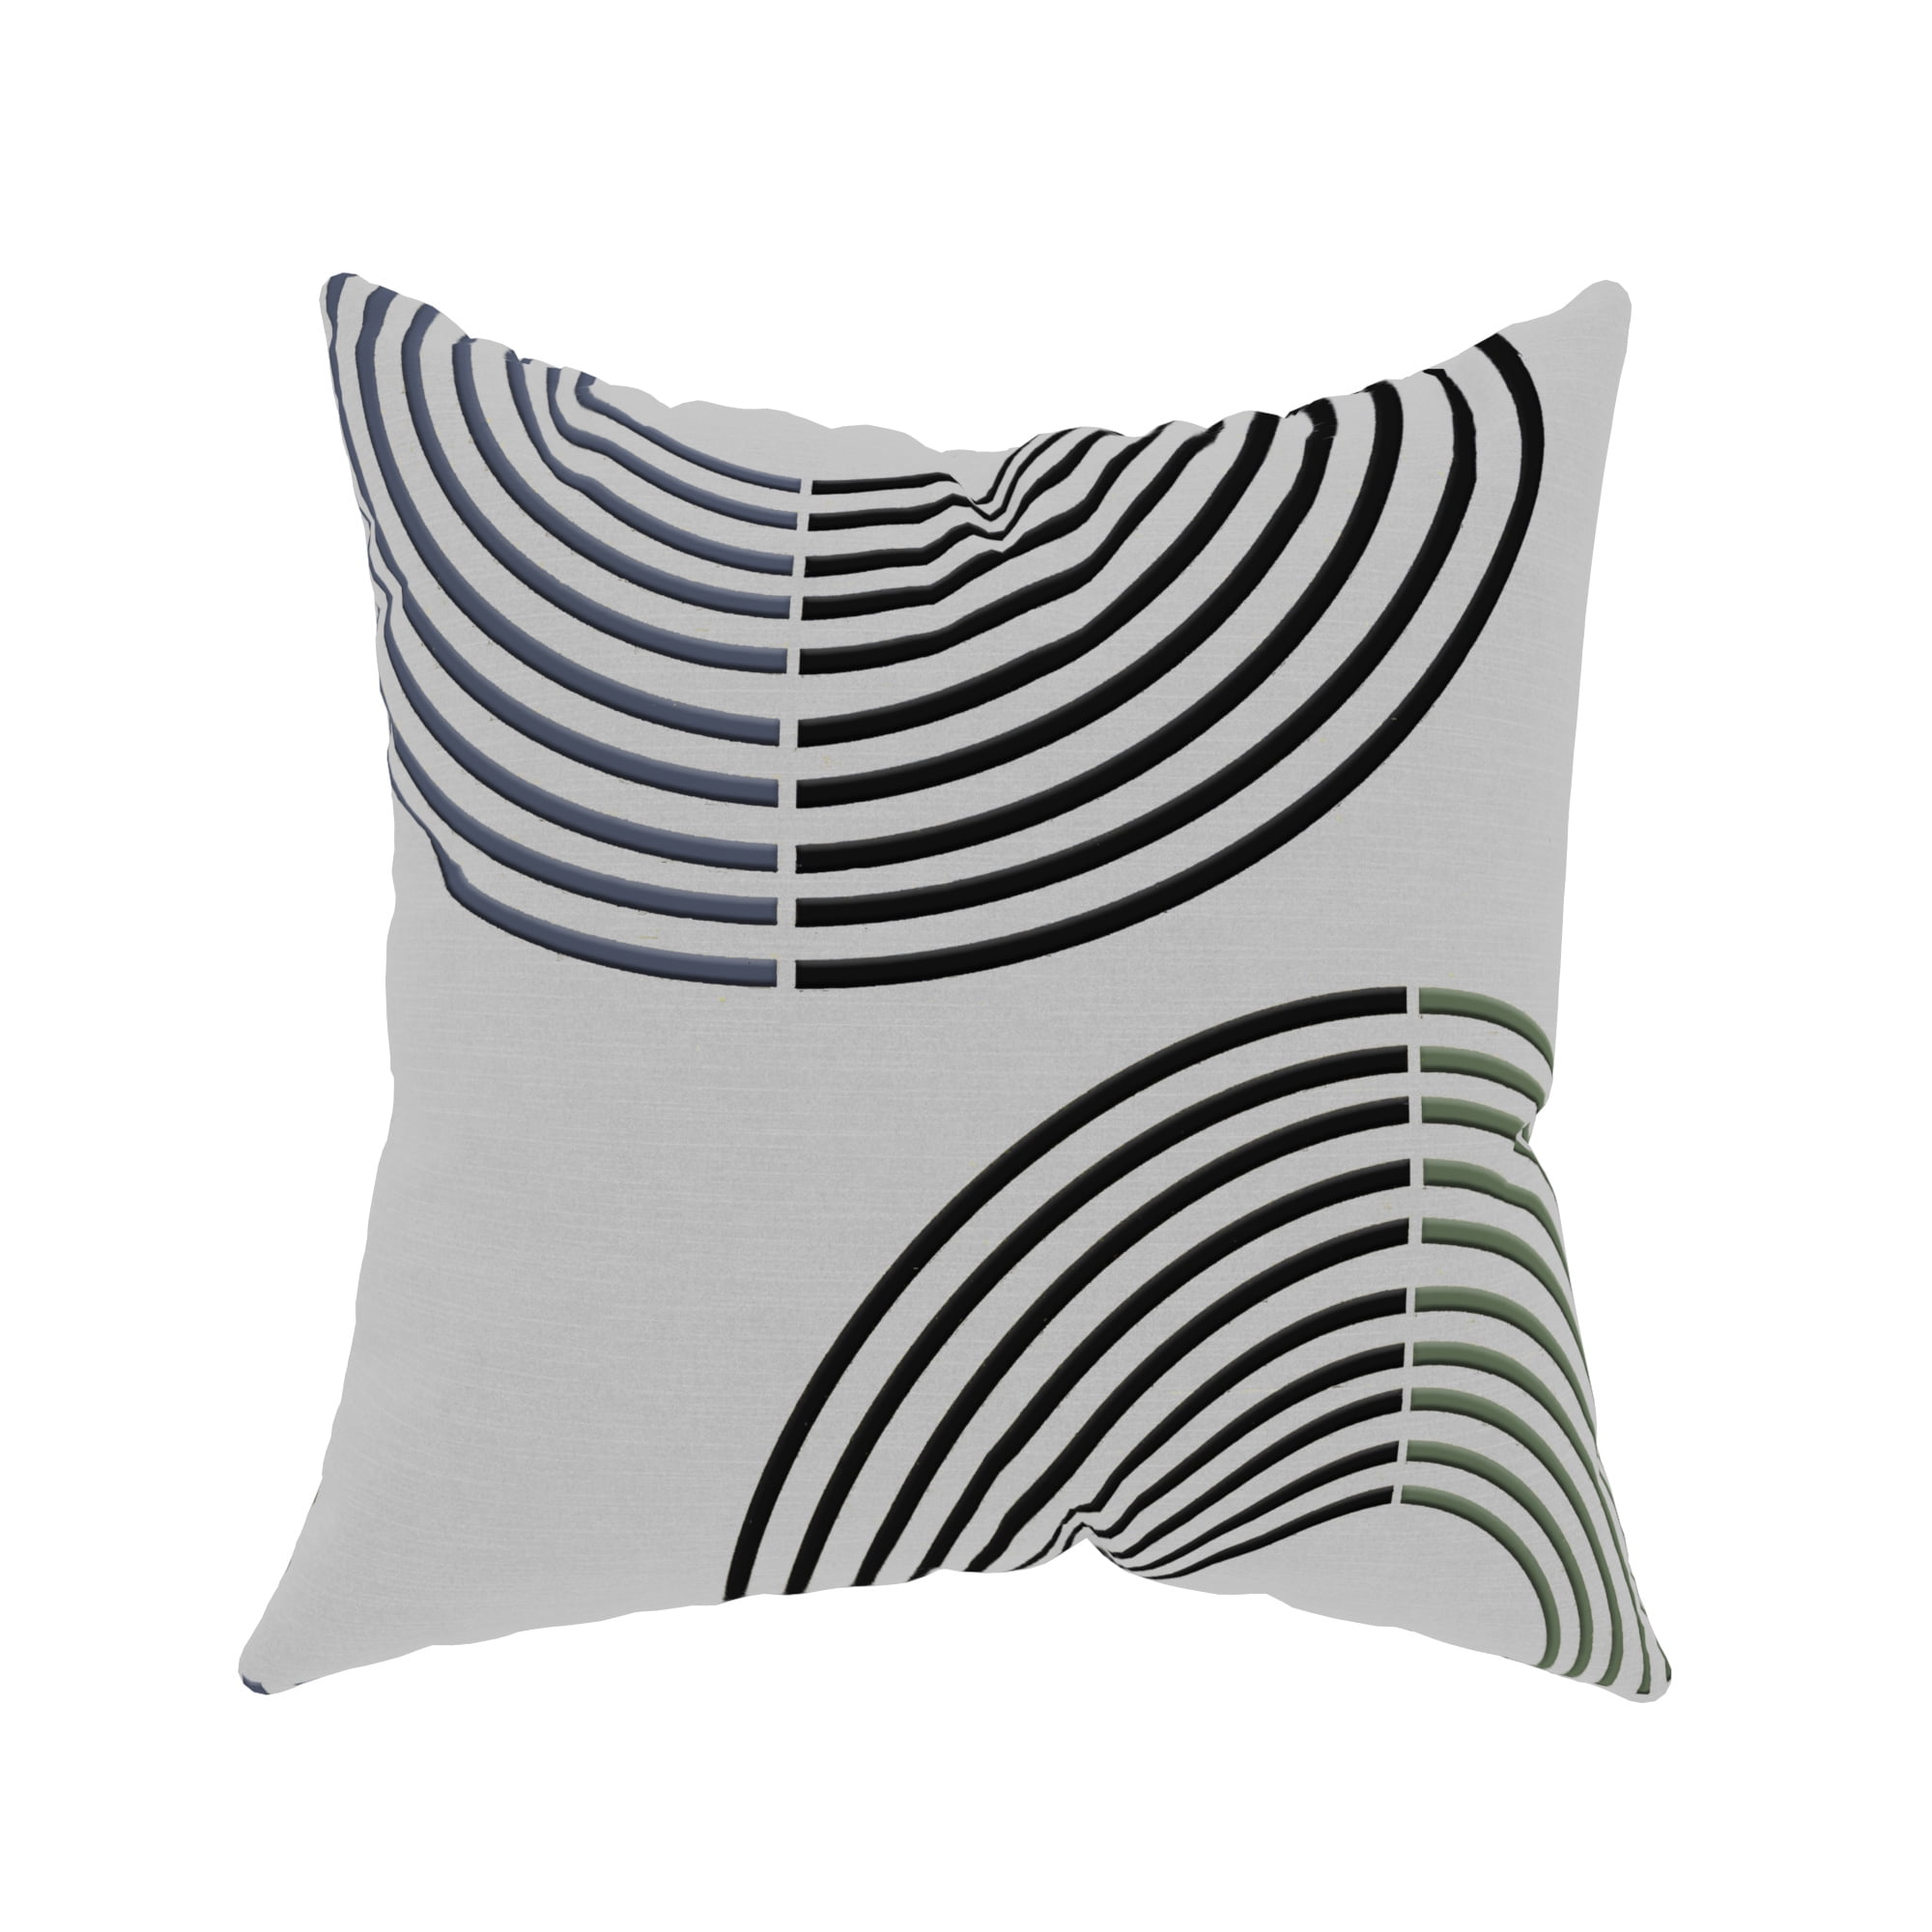 UK Geometric Patterns Soft Touch  POLYESTER CUSHION COVER PILLOW CASE Home Sofa 